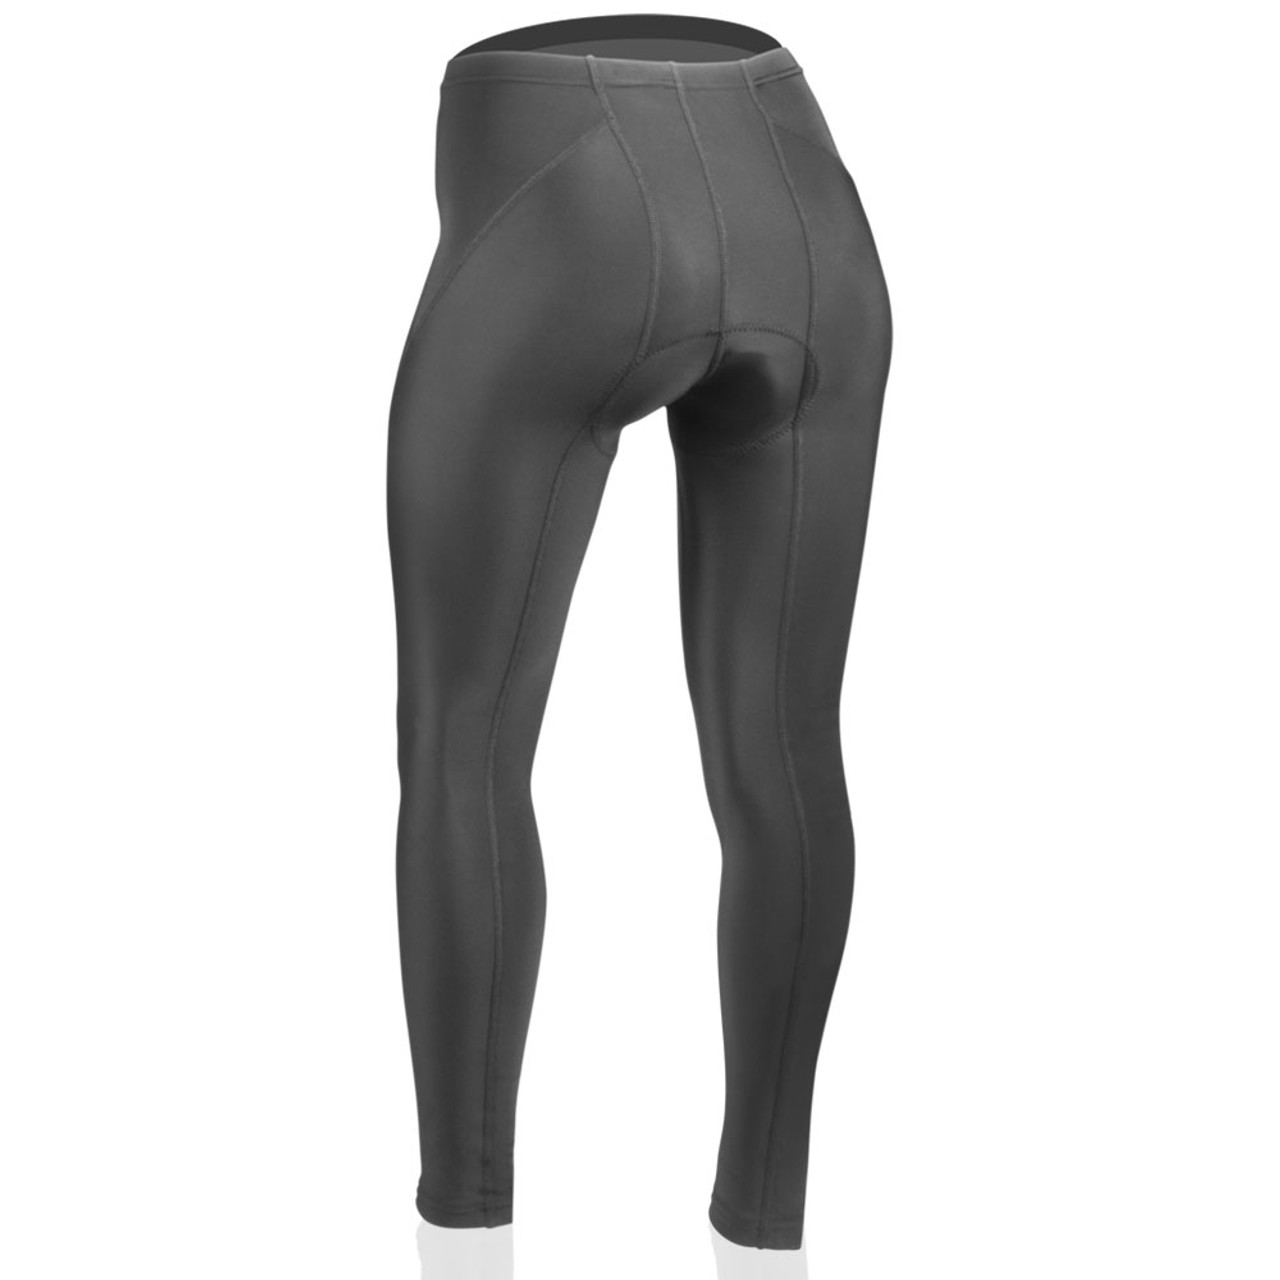 Women's Triumph Padded Cycling Tights | High Performance Compression ...